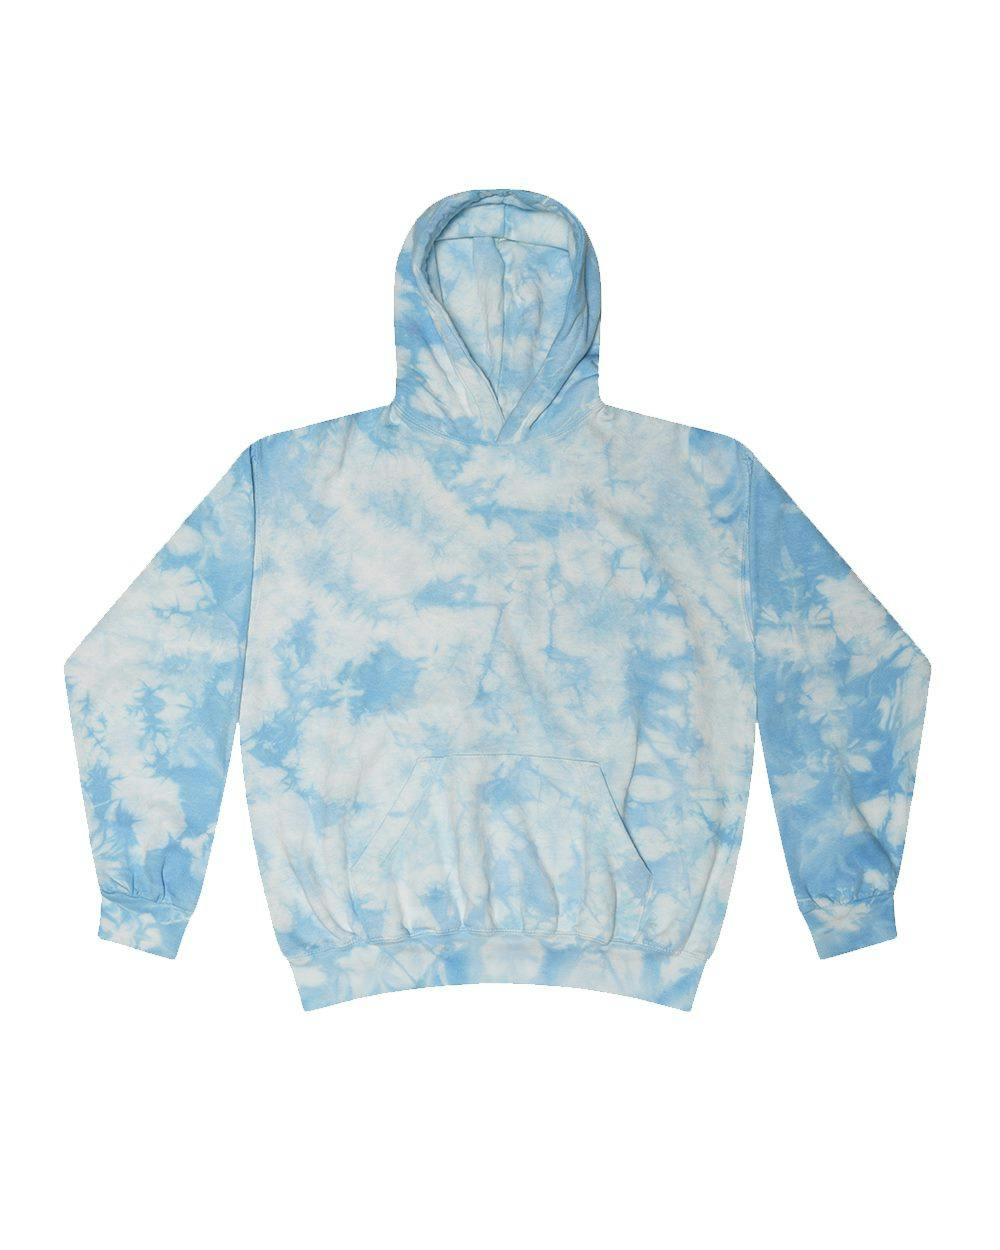 Image for Youth Crystal Tie-Dyed Hooded Sweatshirt - 8790Y